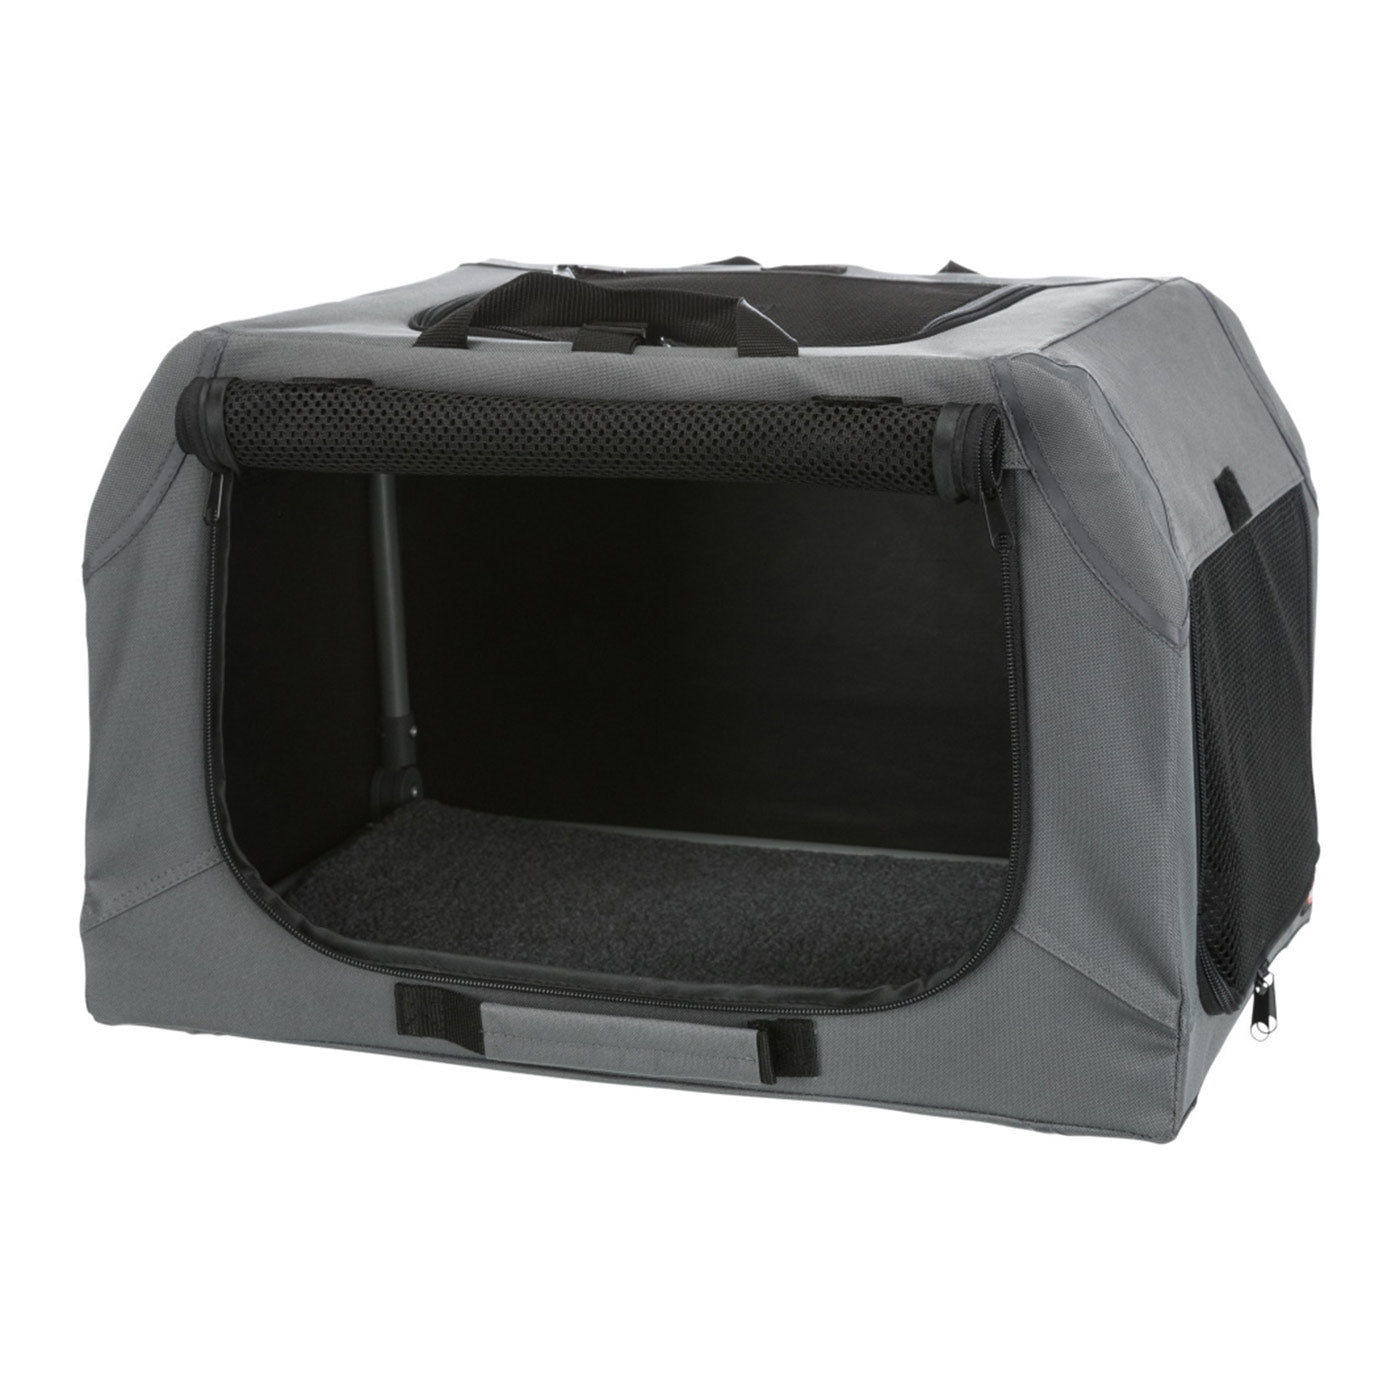 Trixie easy soft travel carrier in [size:xs/s]